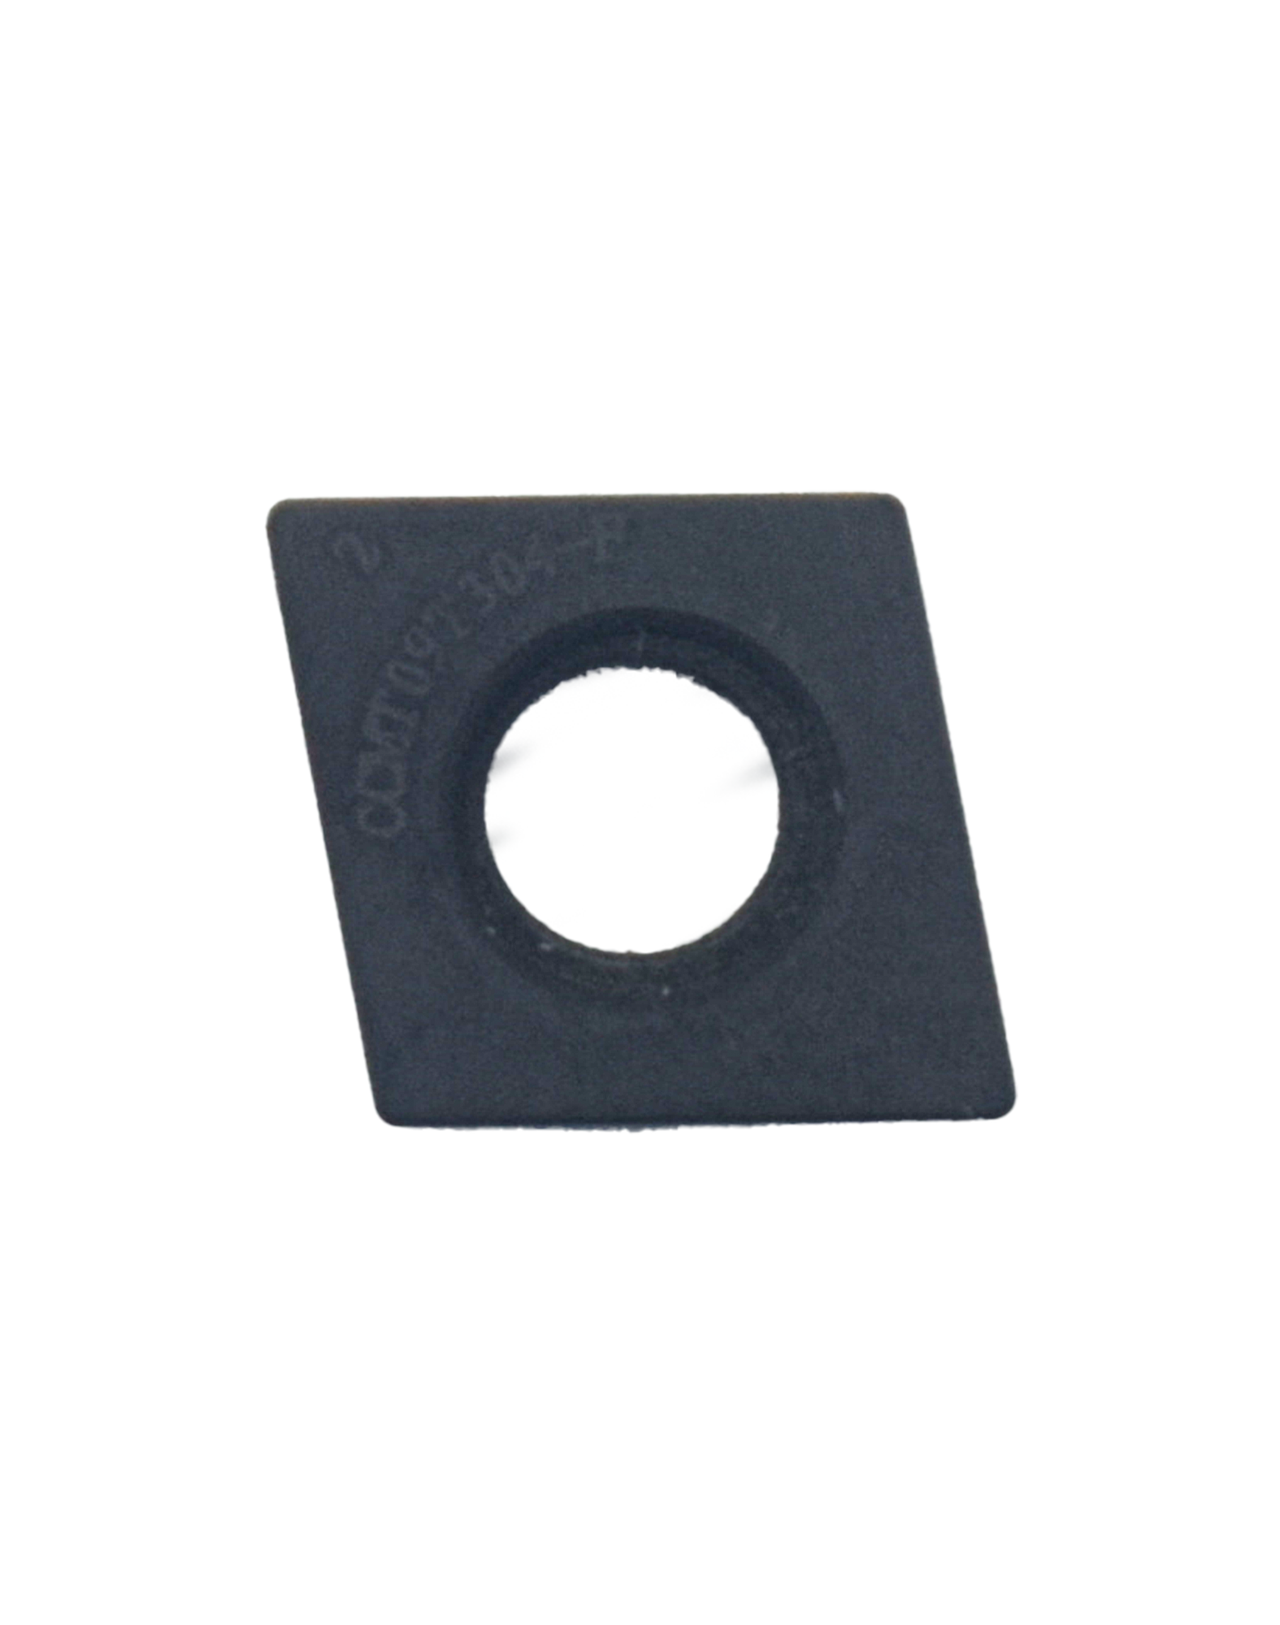 CCMT09T304 for steel and cast iron cbn insert pack of 1